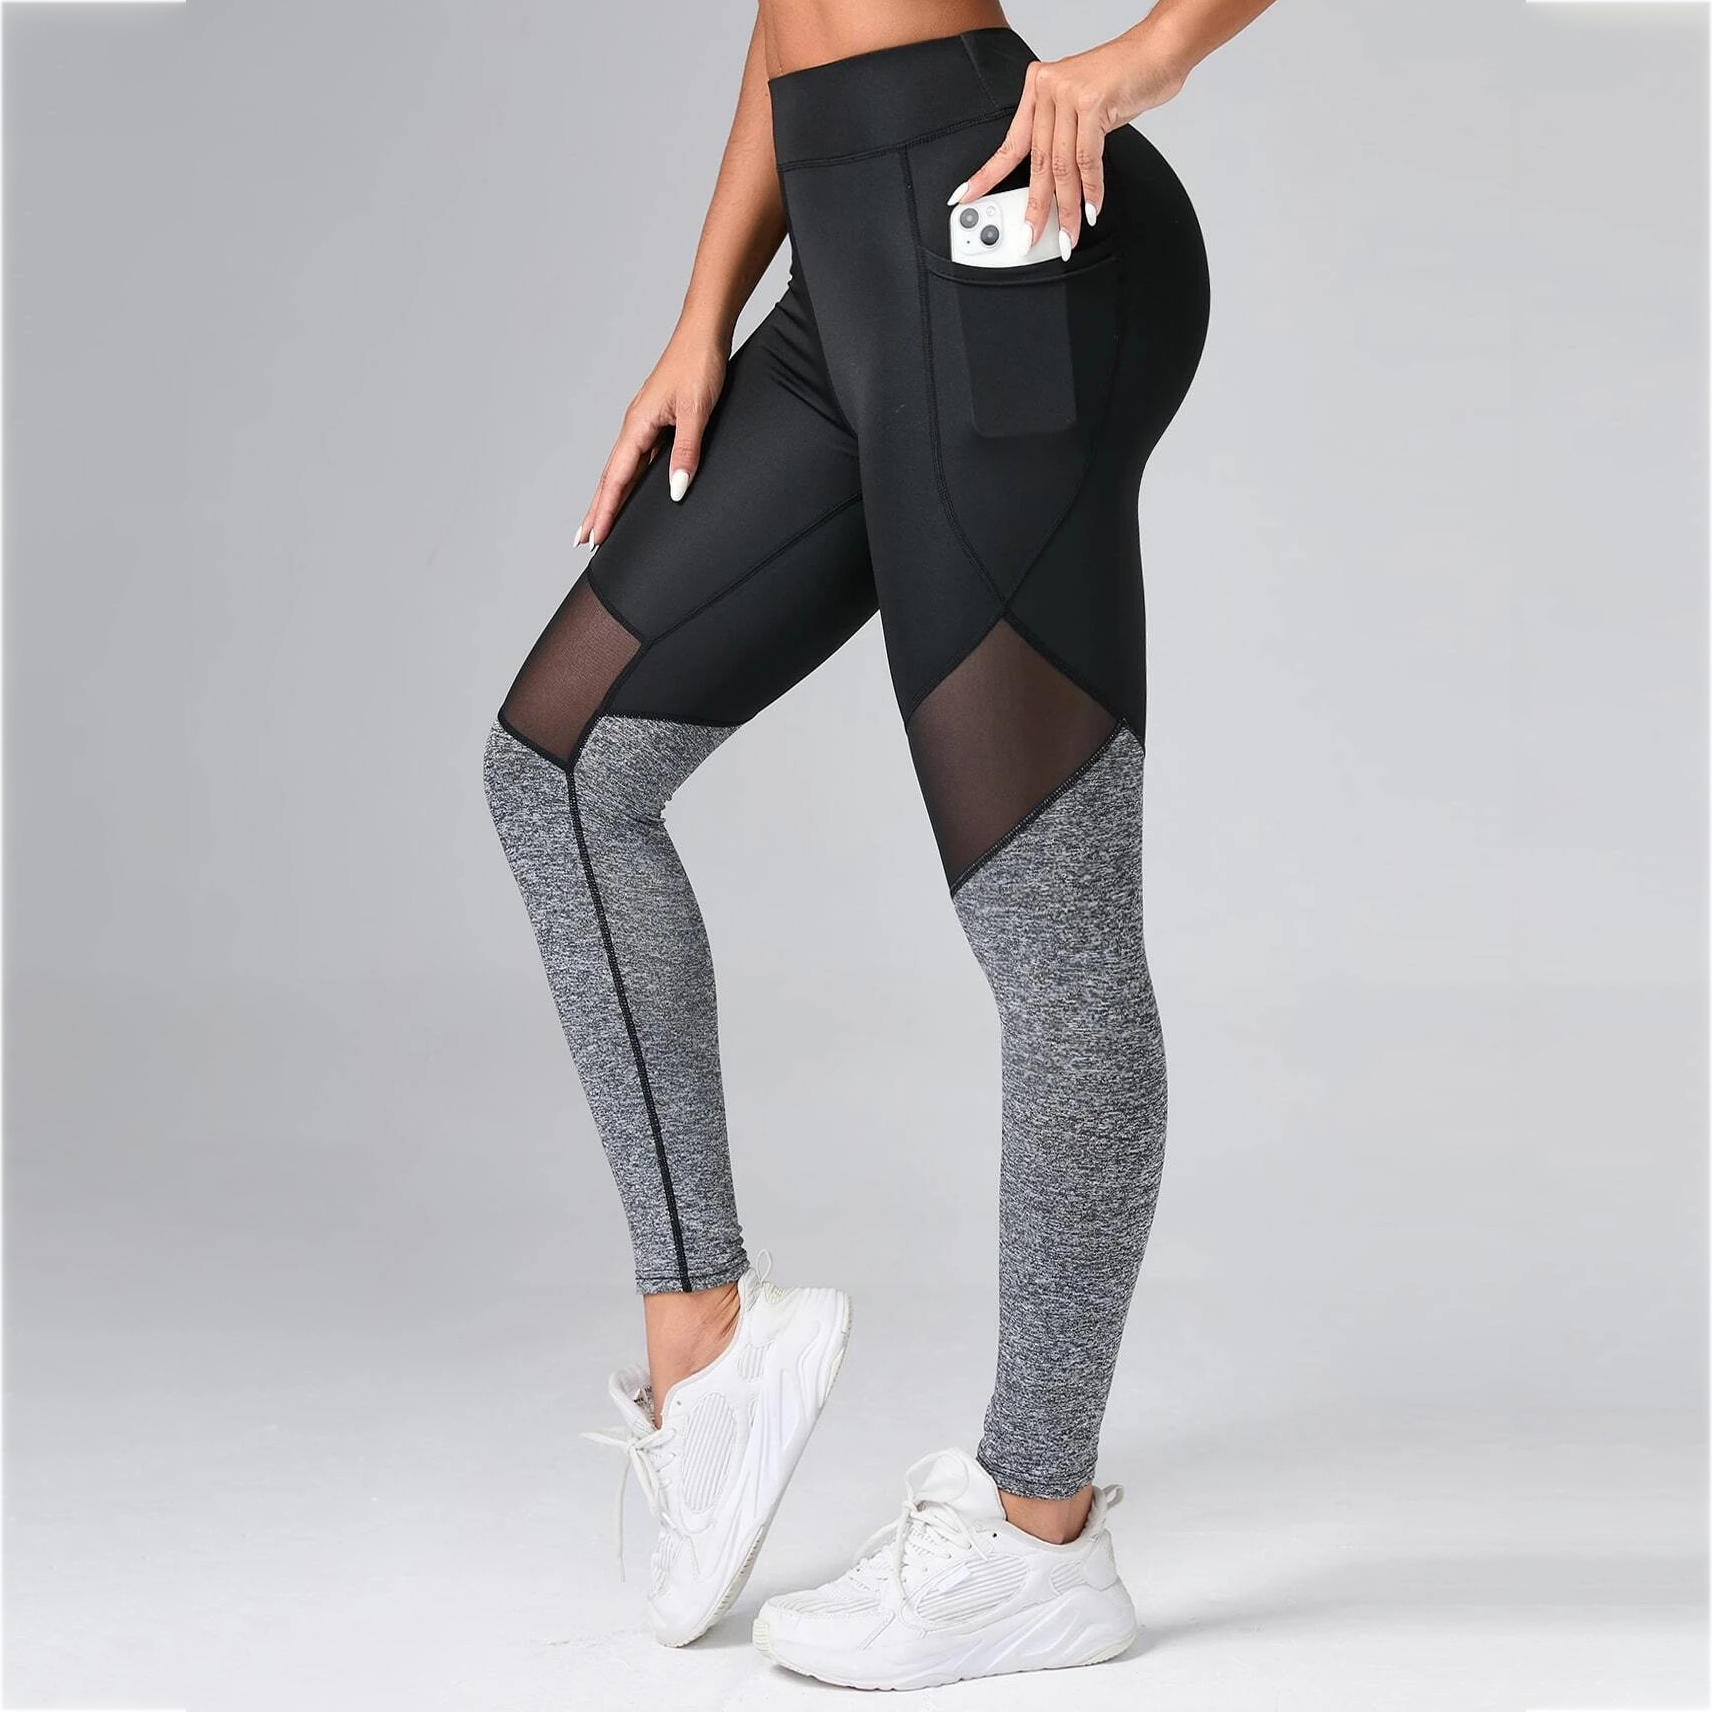 Contrast Color Panel Yoga Leggings Mesh Insert Gym Tights With Phone Pocket - L